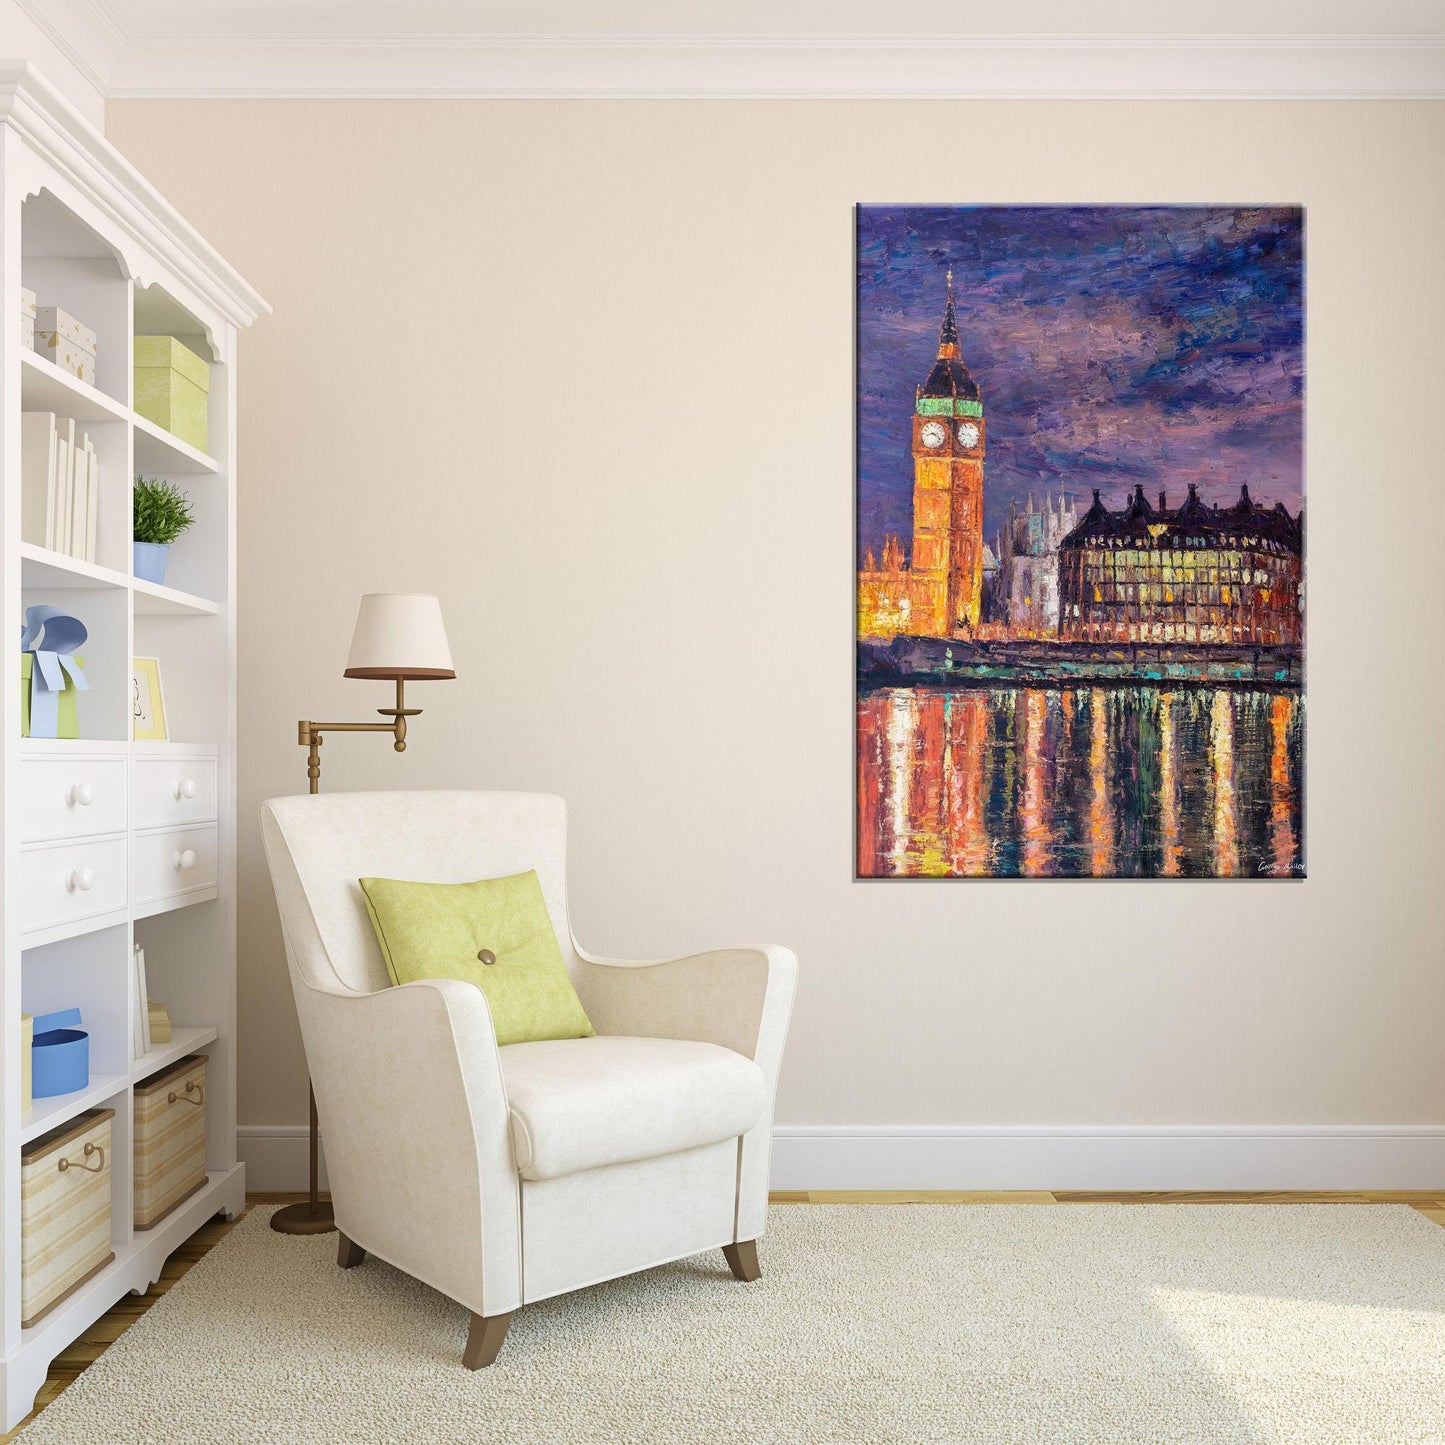 Large Oil Painting Tower of London on the River Thames at Night, Original Abstract Painting, Abstract Landscape Painting, Contemporary Art